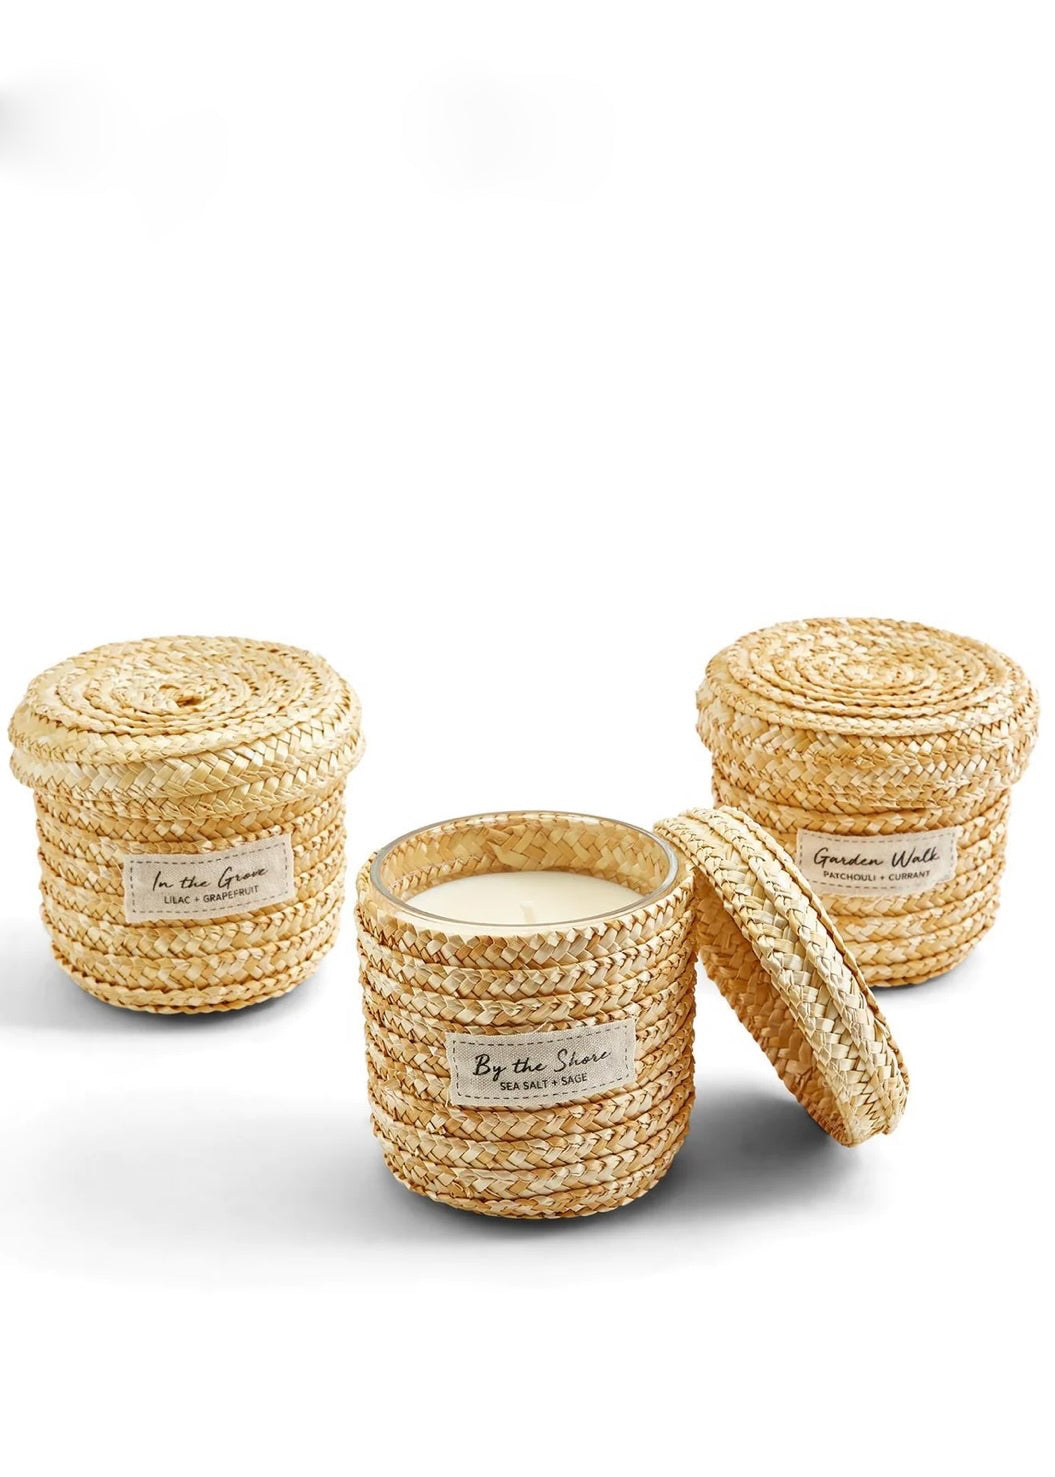 HAND-CRAFTED STRAW LIDDED BASKET Candle